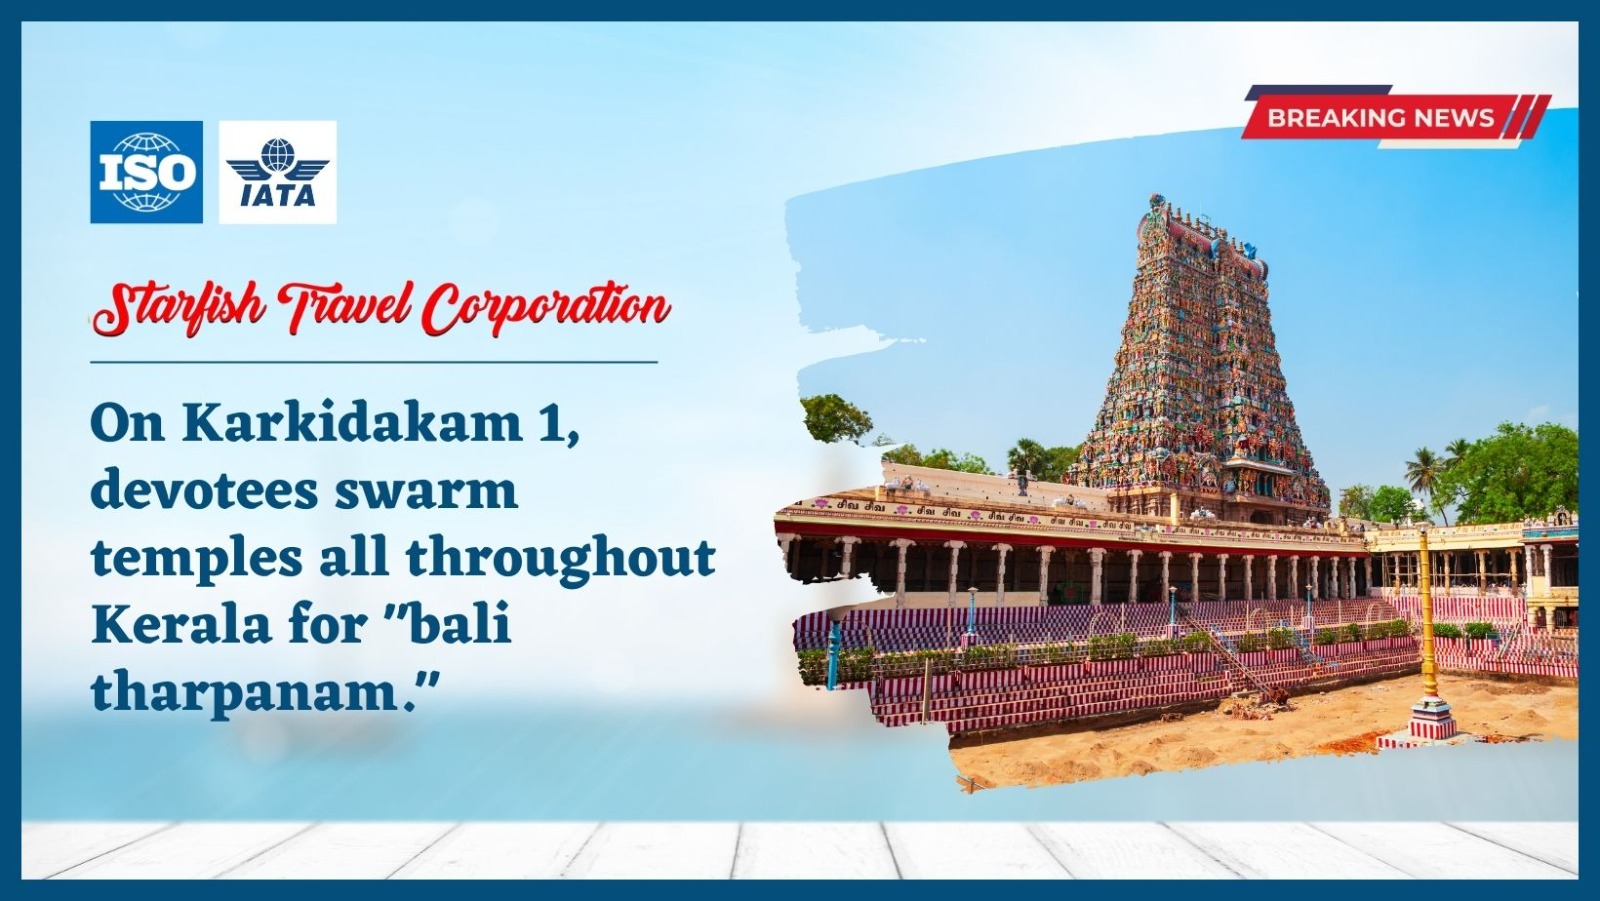 You are currently viewing On Karkidakam 1, devotees swarm temples all throughout Kerala for “bali tharpanam.”